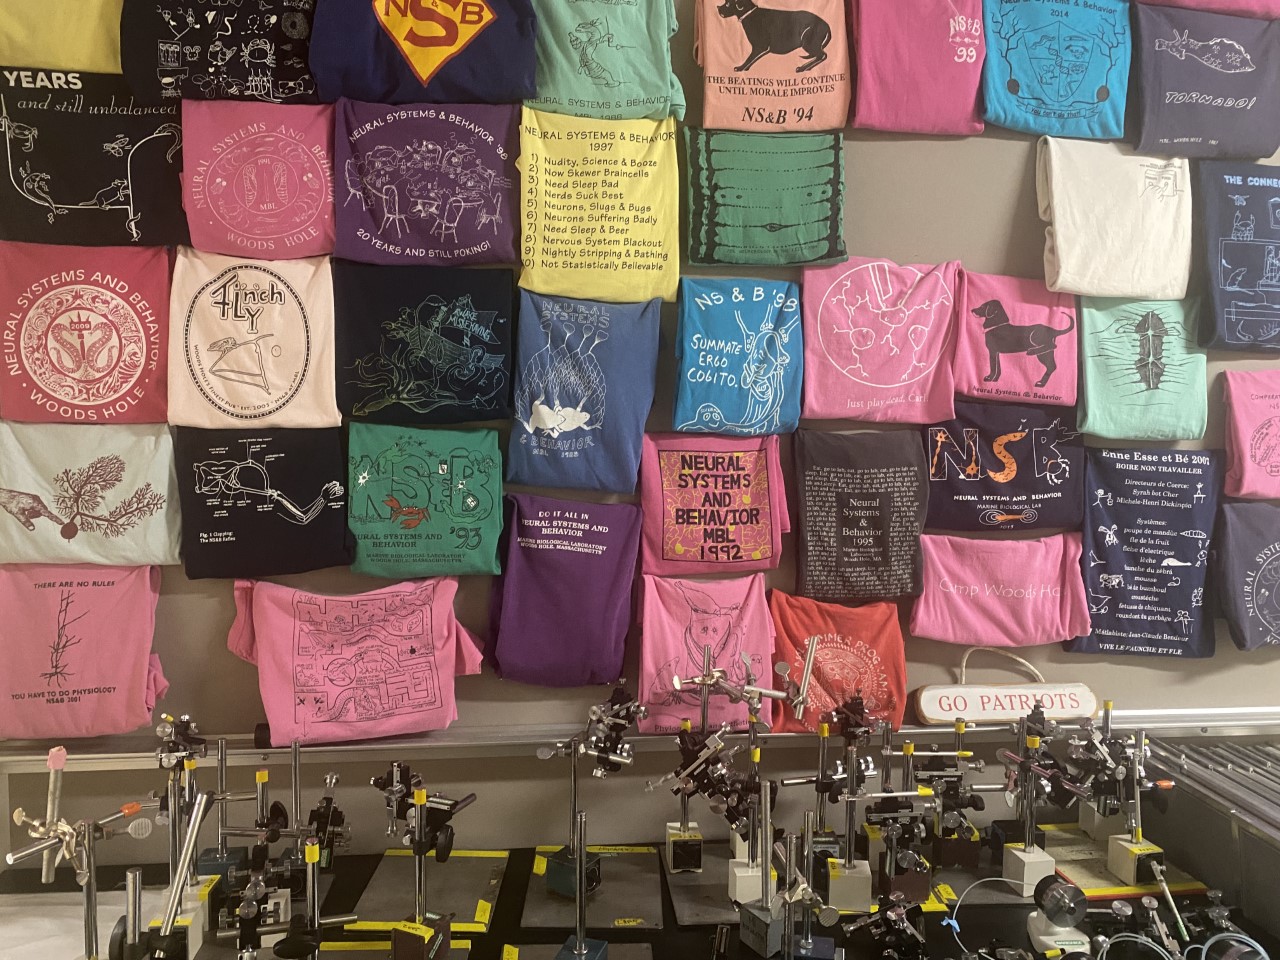 A montage of course T-shirts from past years outside the Neural Systems & Behavior lab in Loeb Laboratory. Credit: Diana Kenney